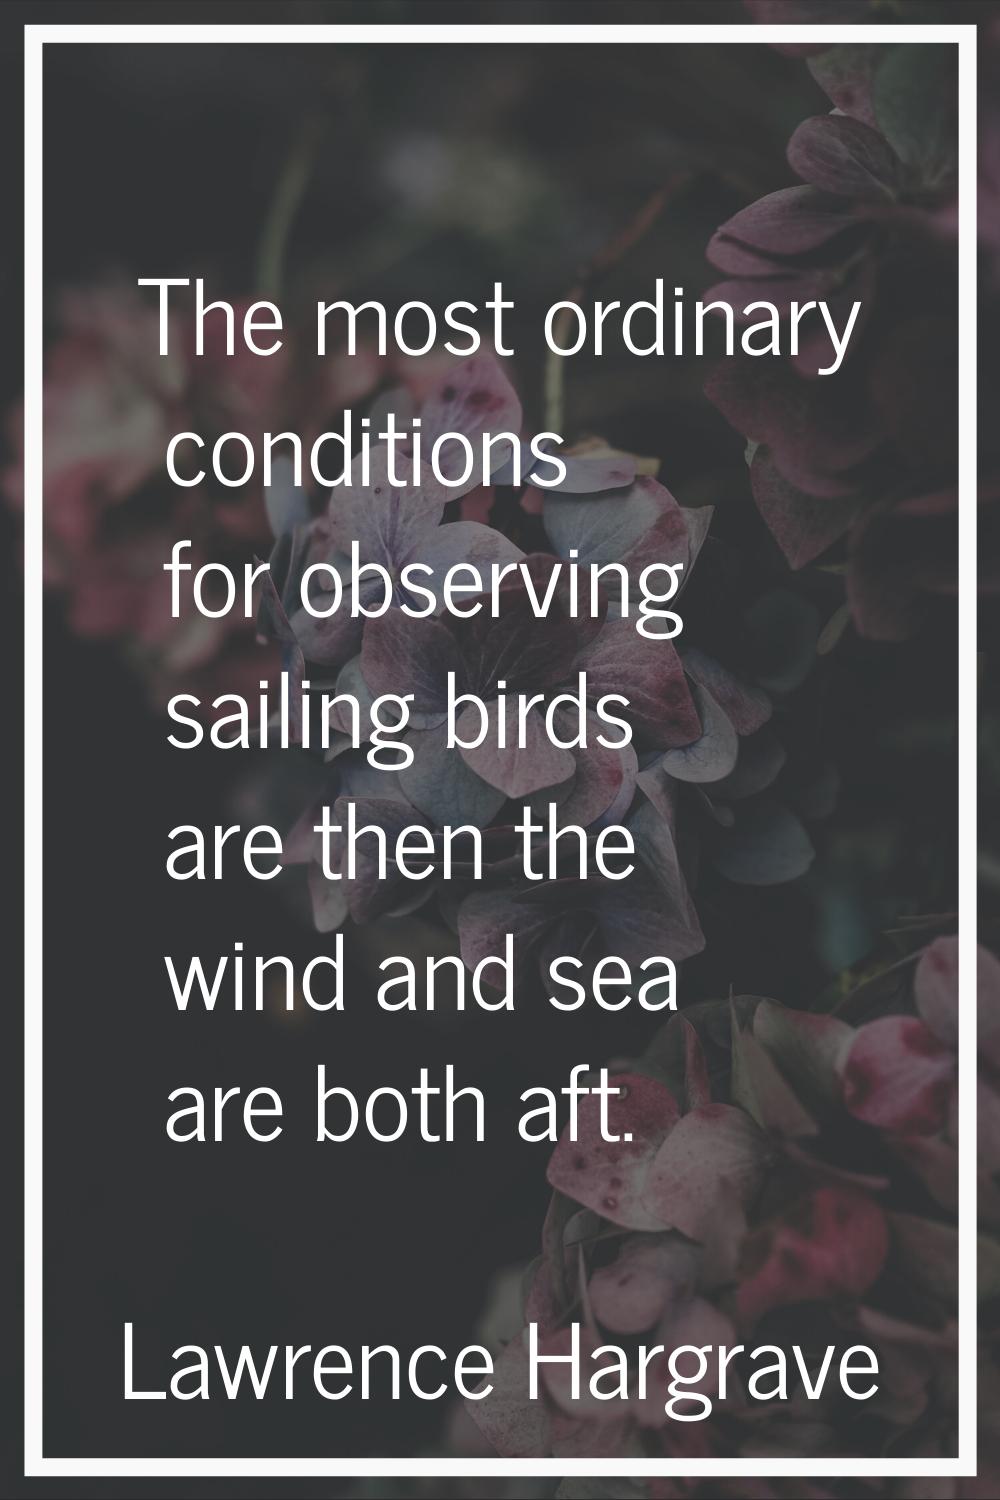 The most ordinary conditions for observing sailing birds are then the wind and sea are both aft.